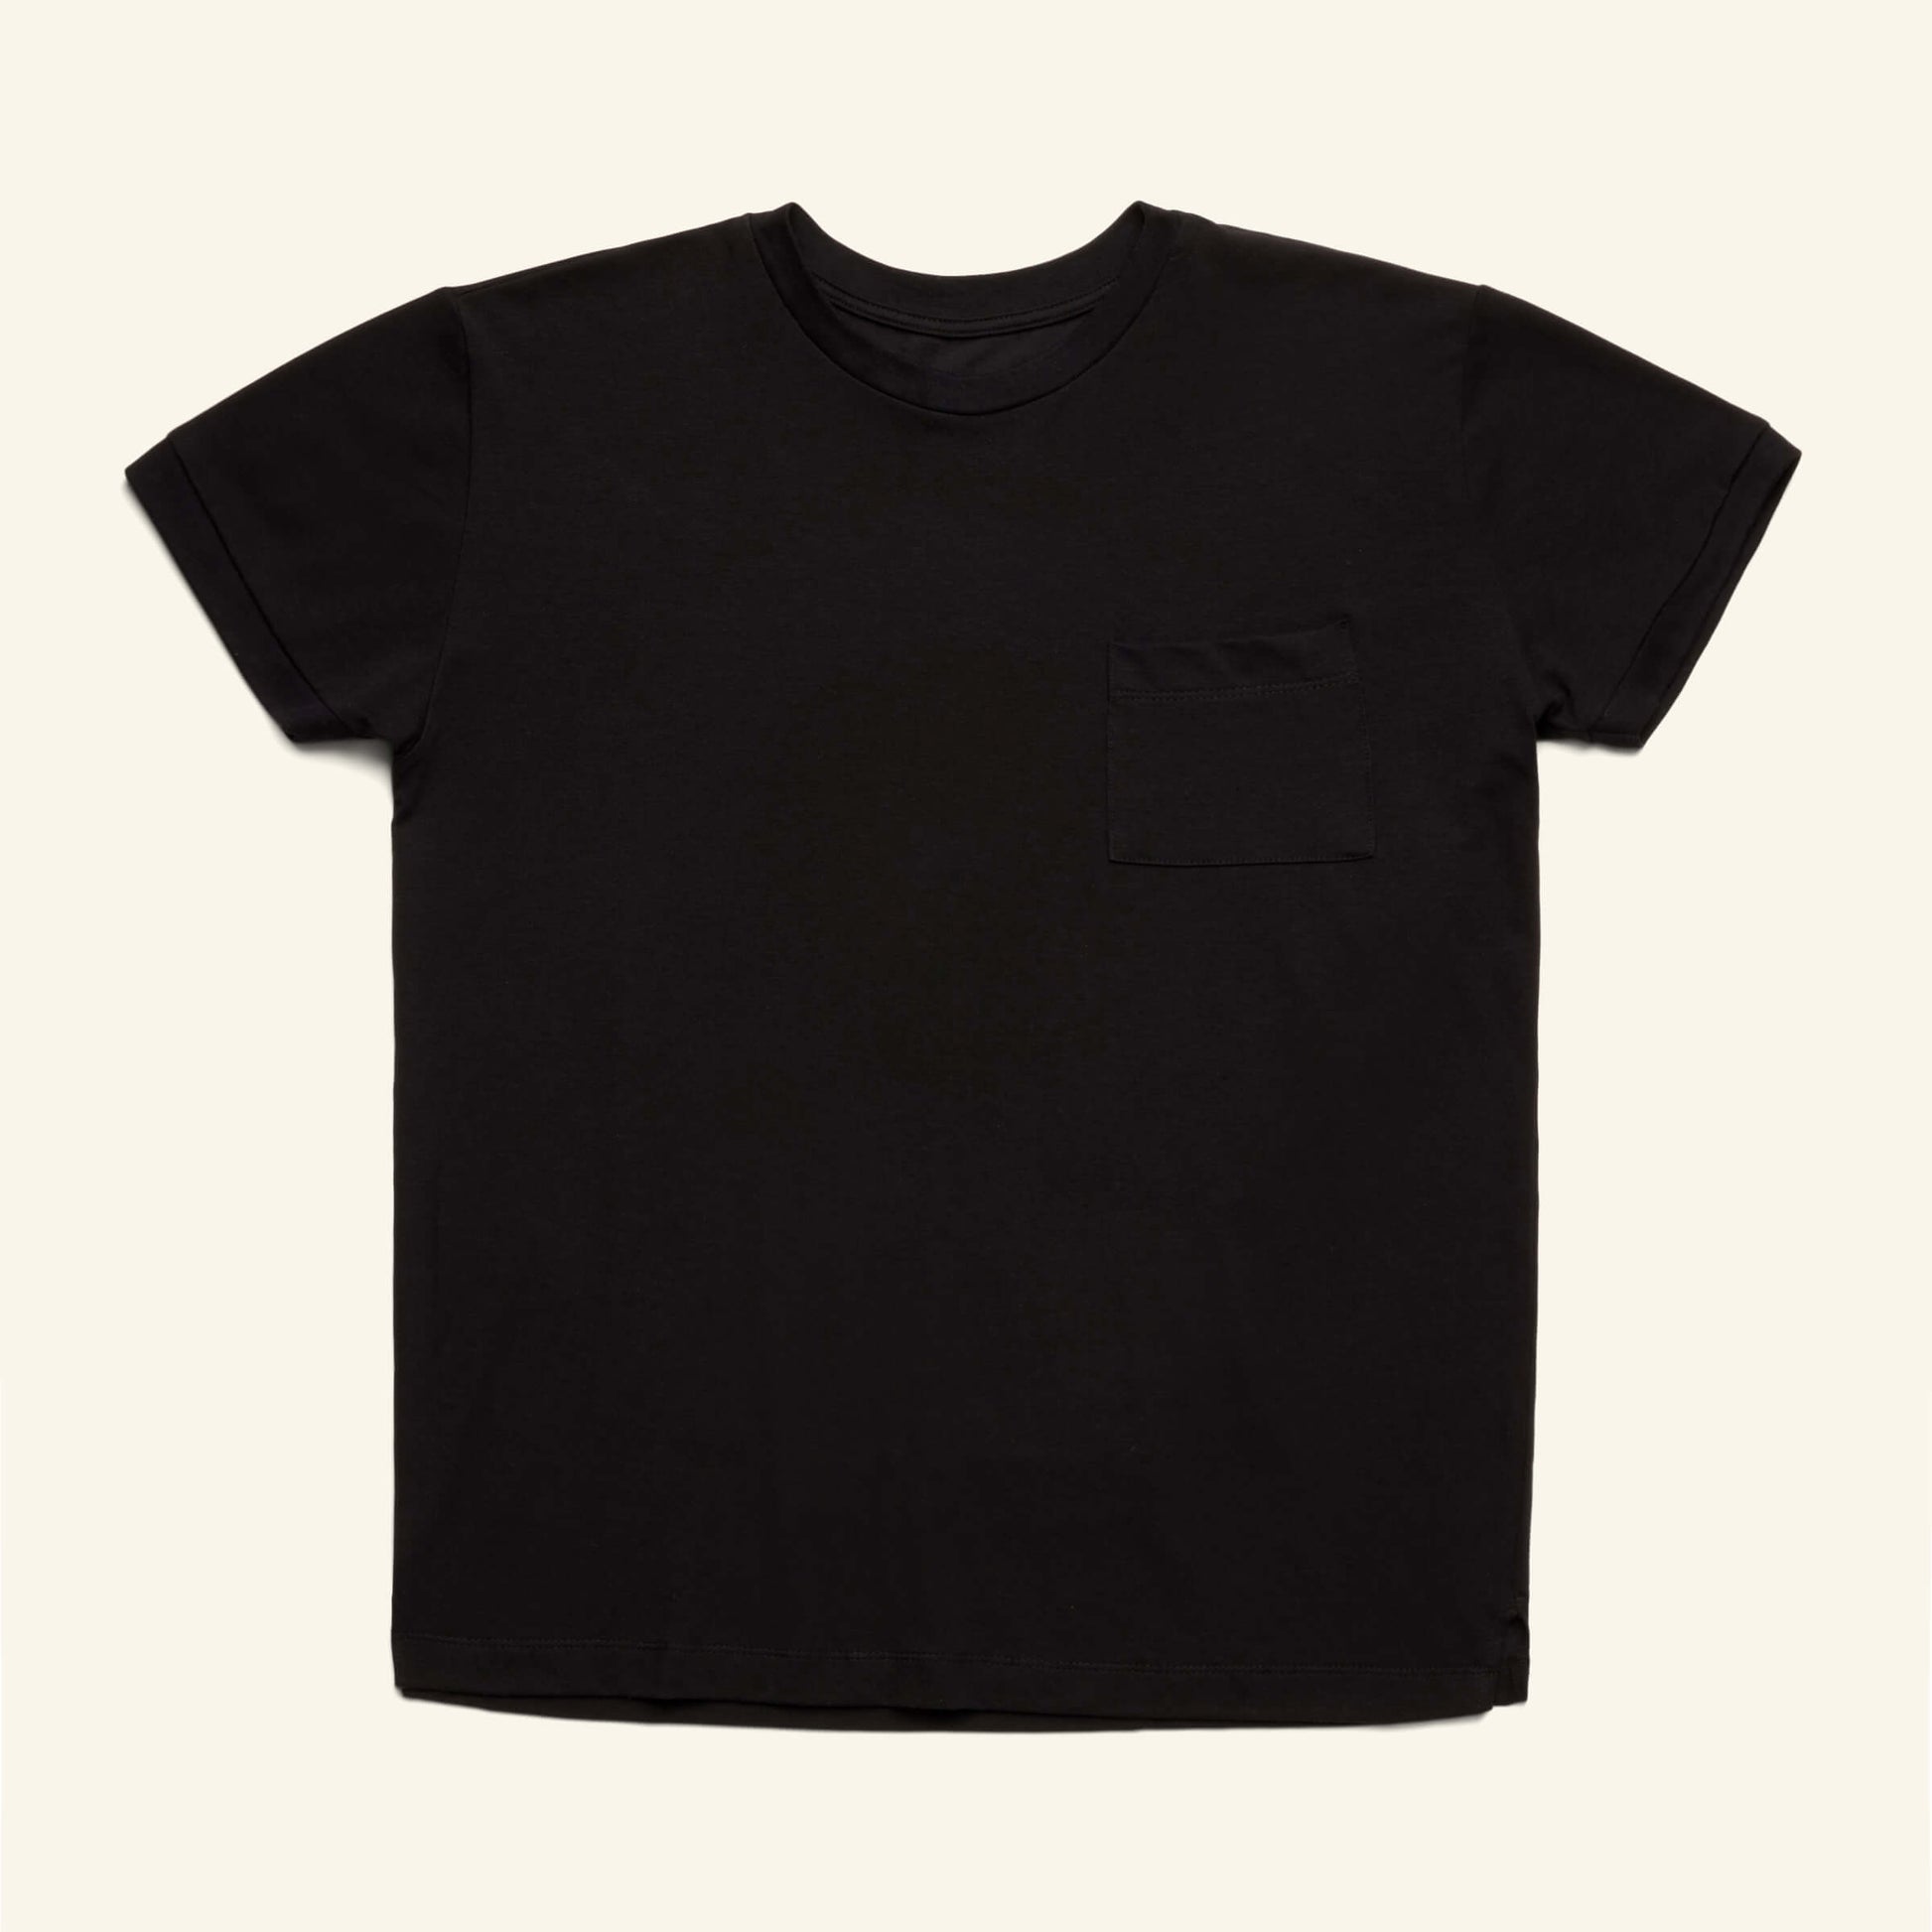 The Slumber Cloud Essential Pocket Tee made with Outlast temperature regulation technology